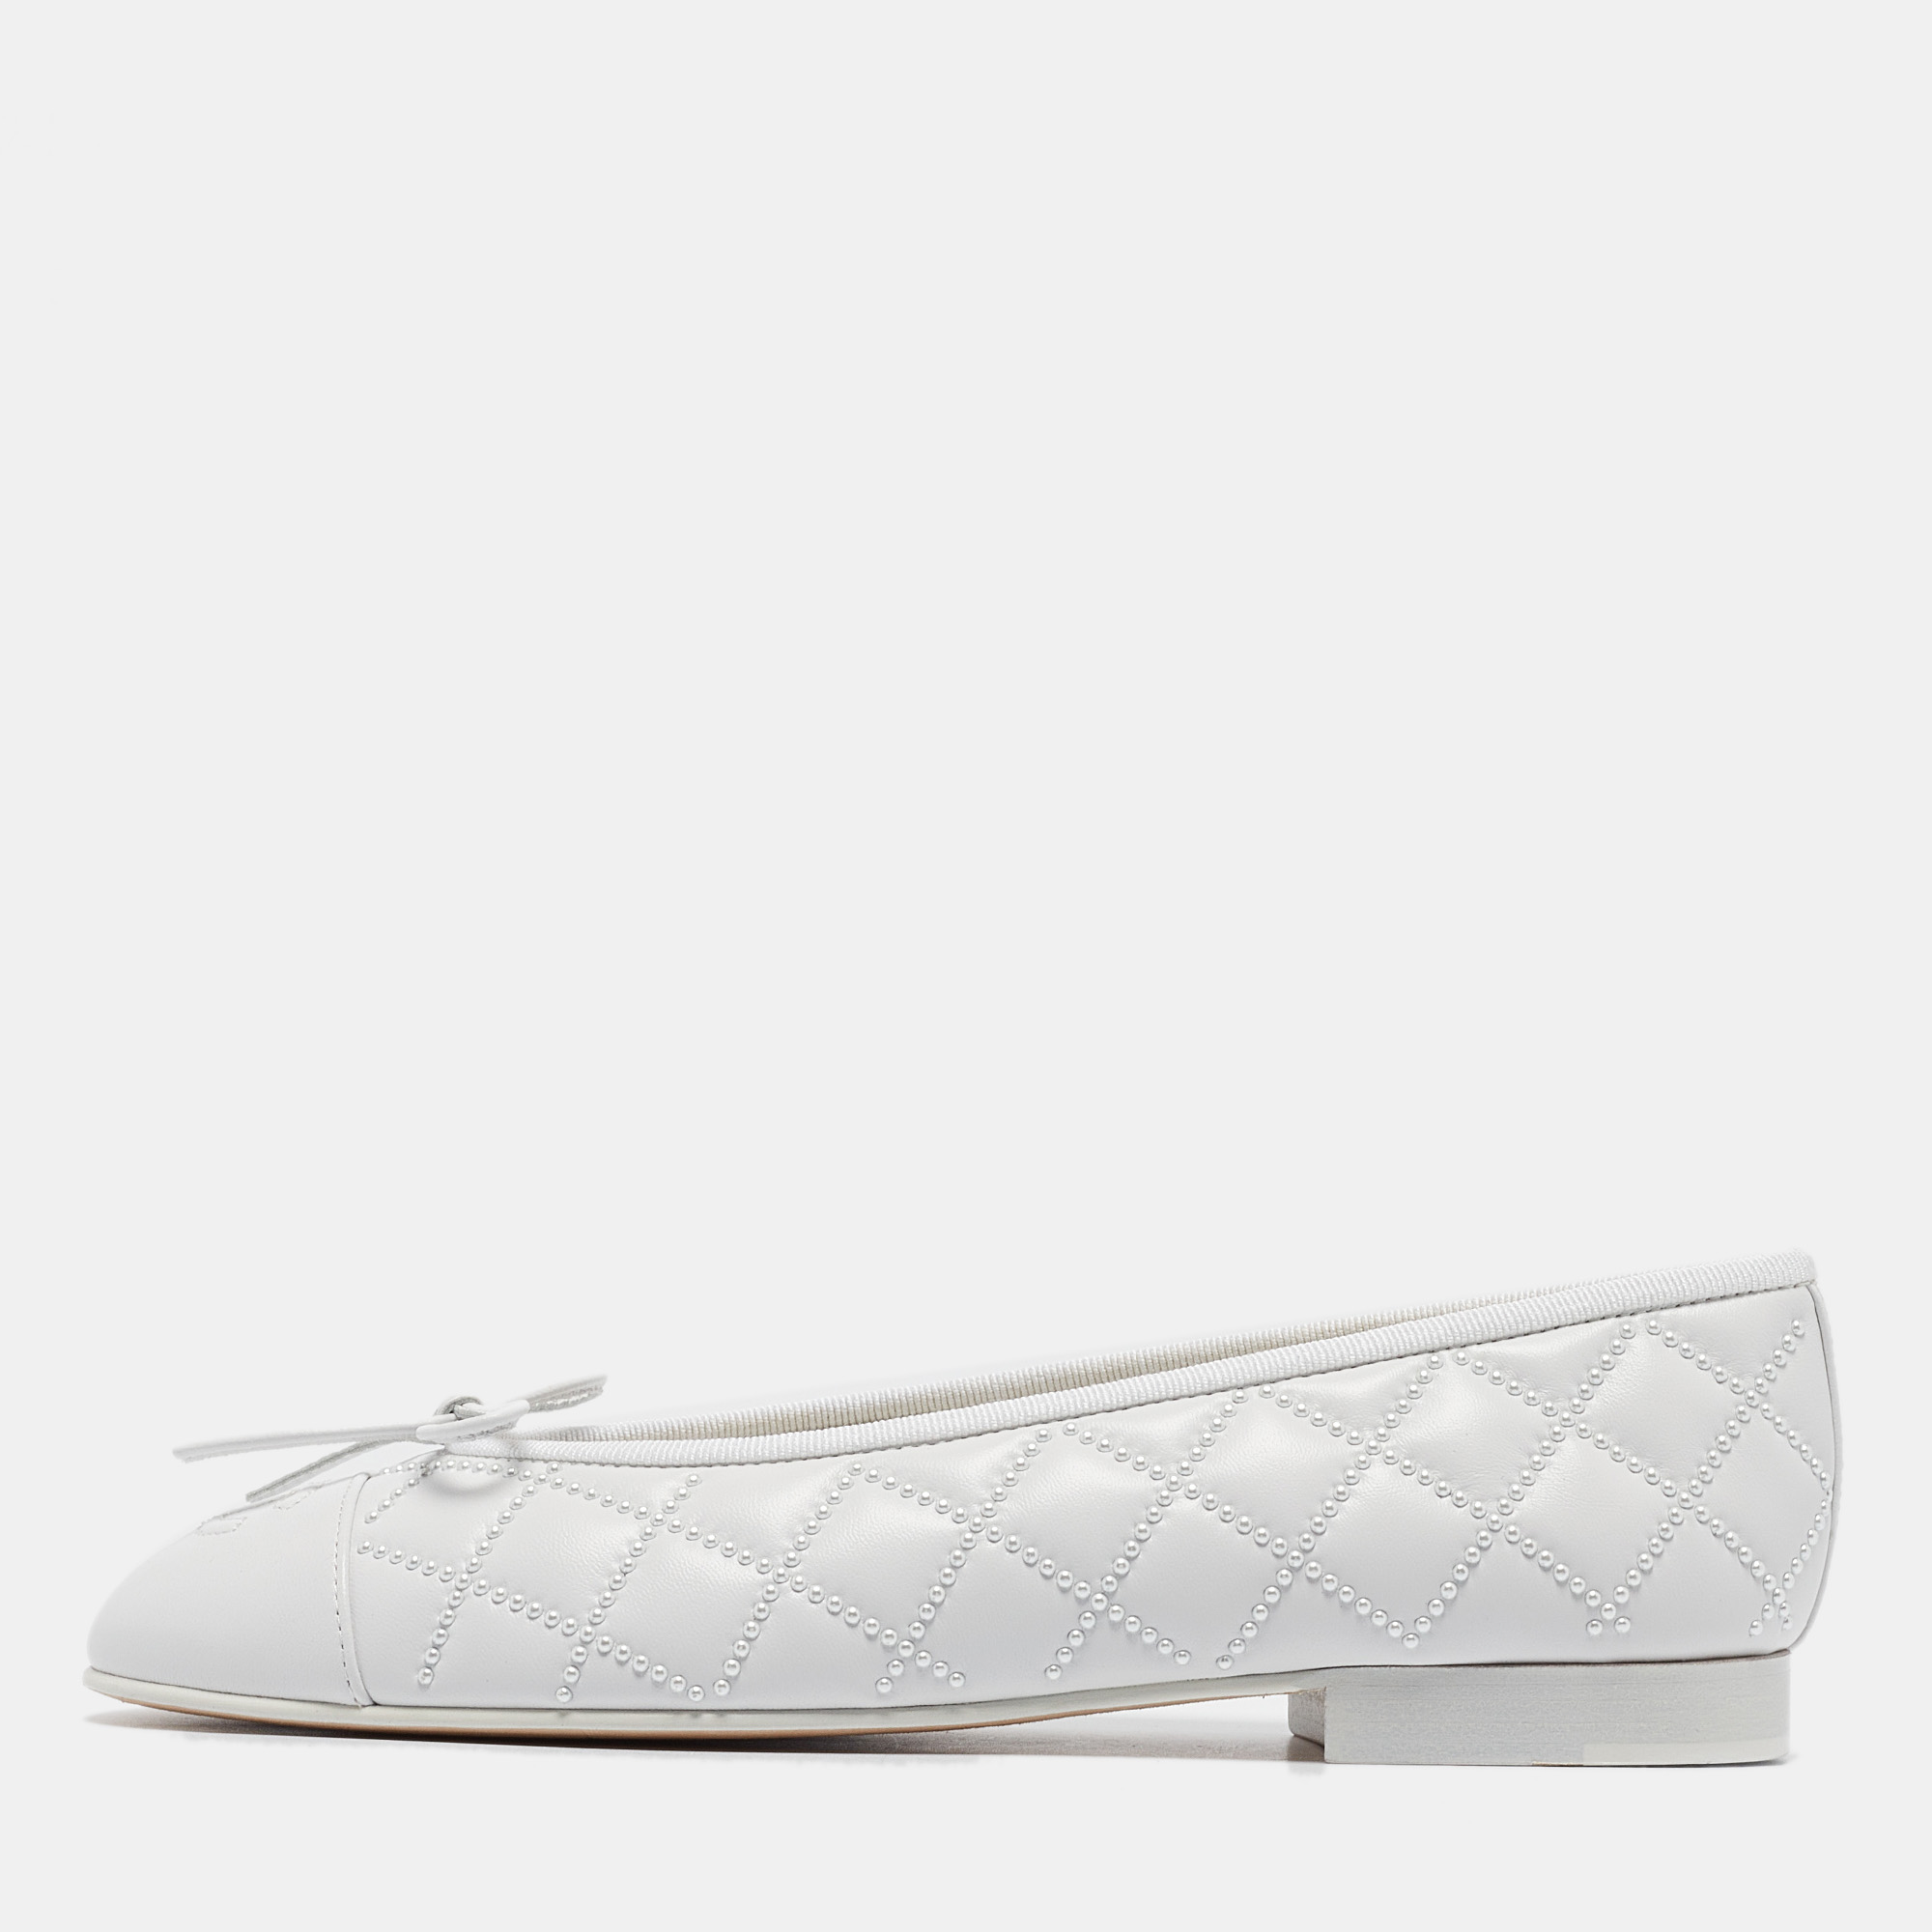 

Chanel White Leather Pearl Embellished CC Bow Ballet Flats Size